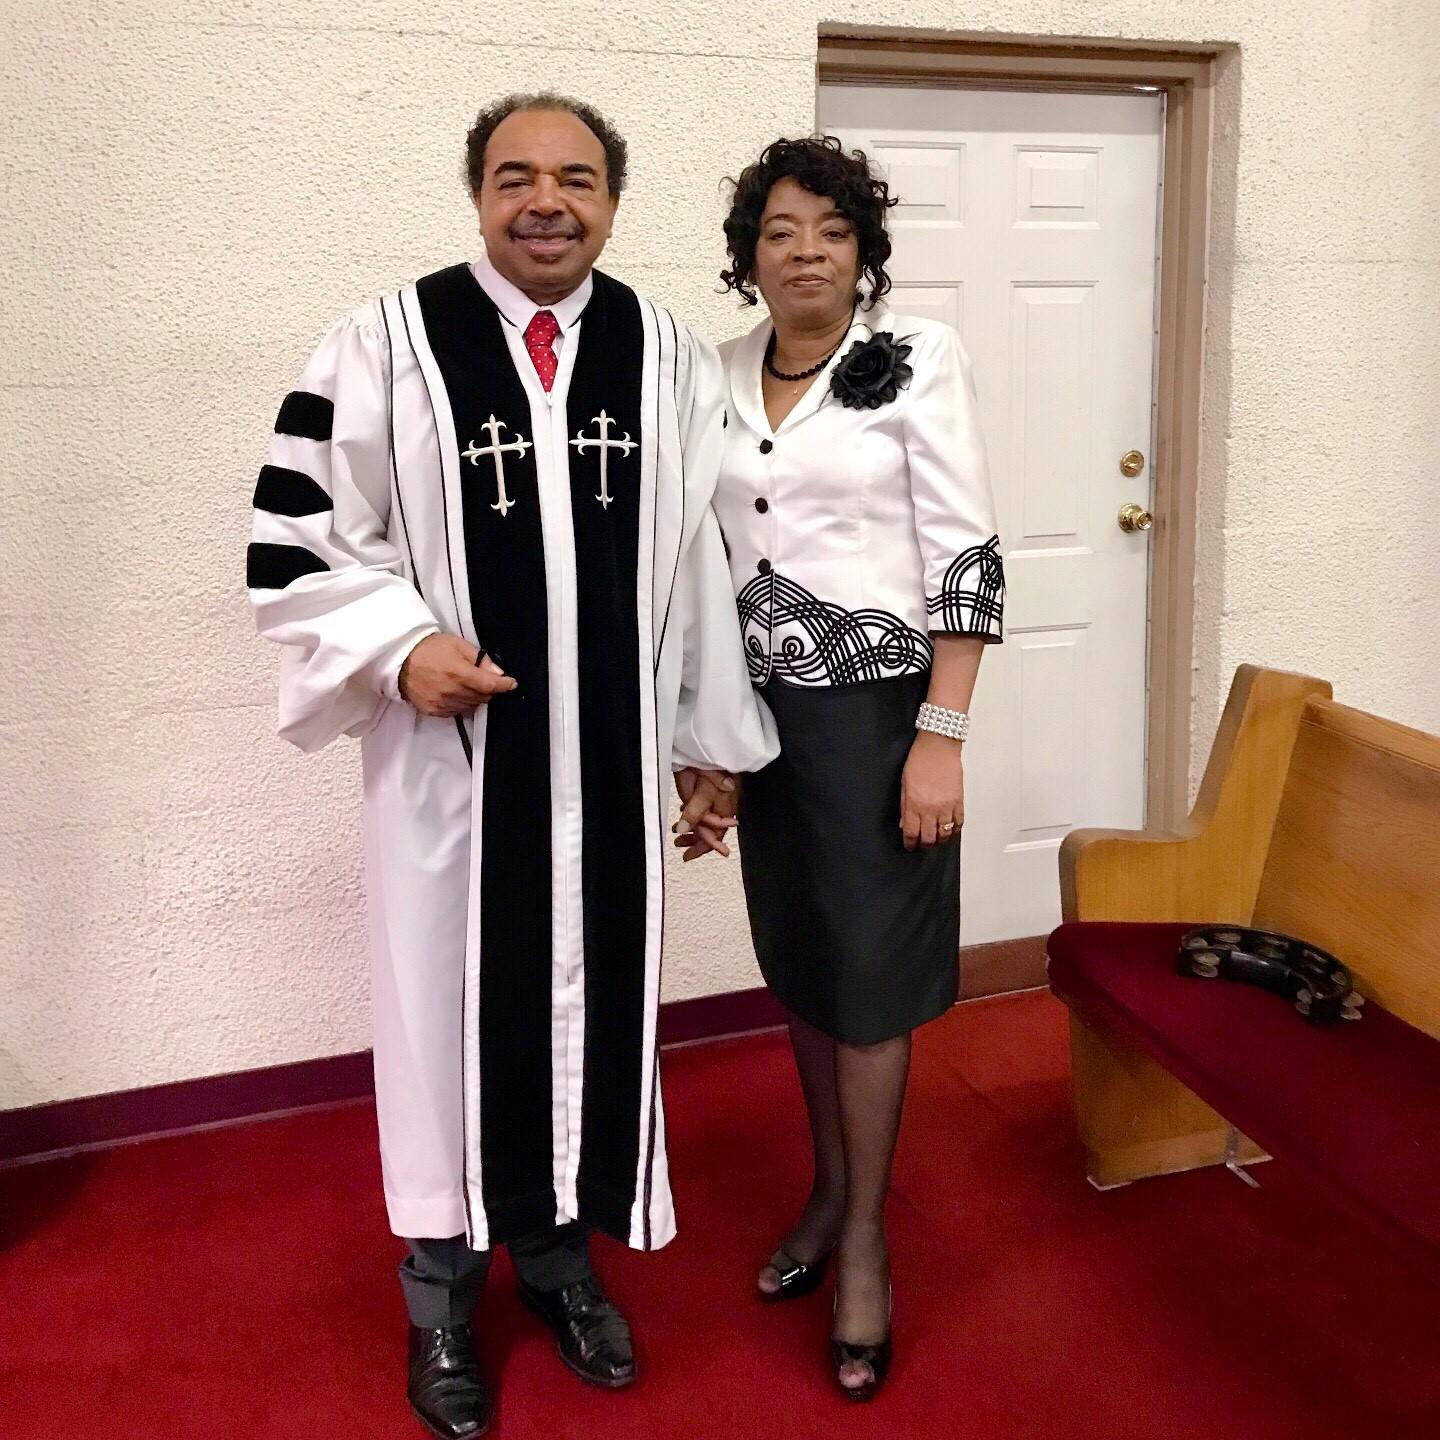 Pastor Hayward with his wife